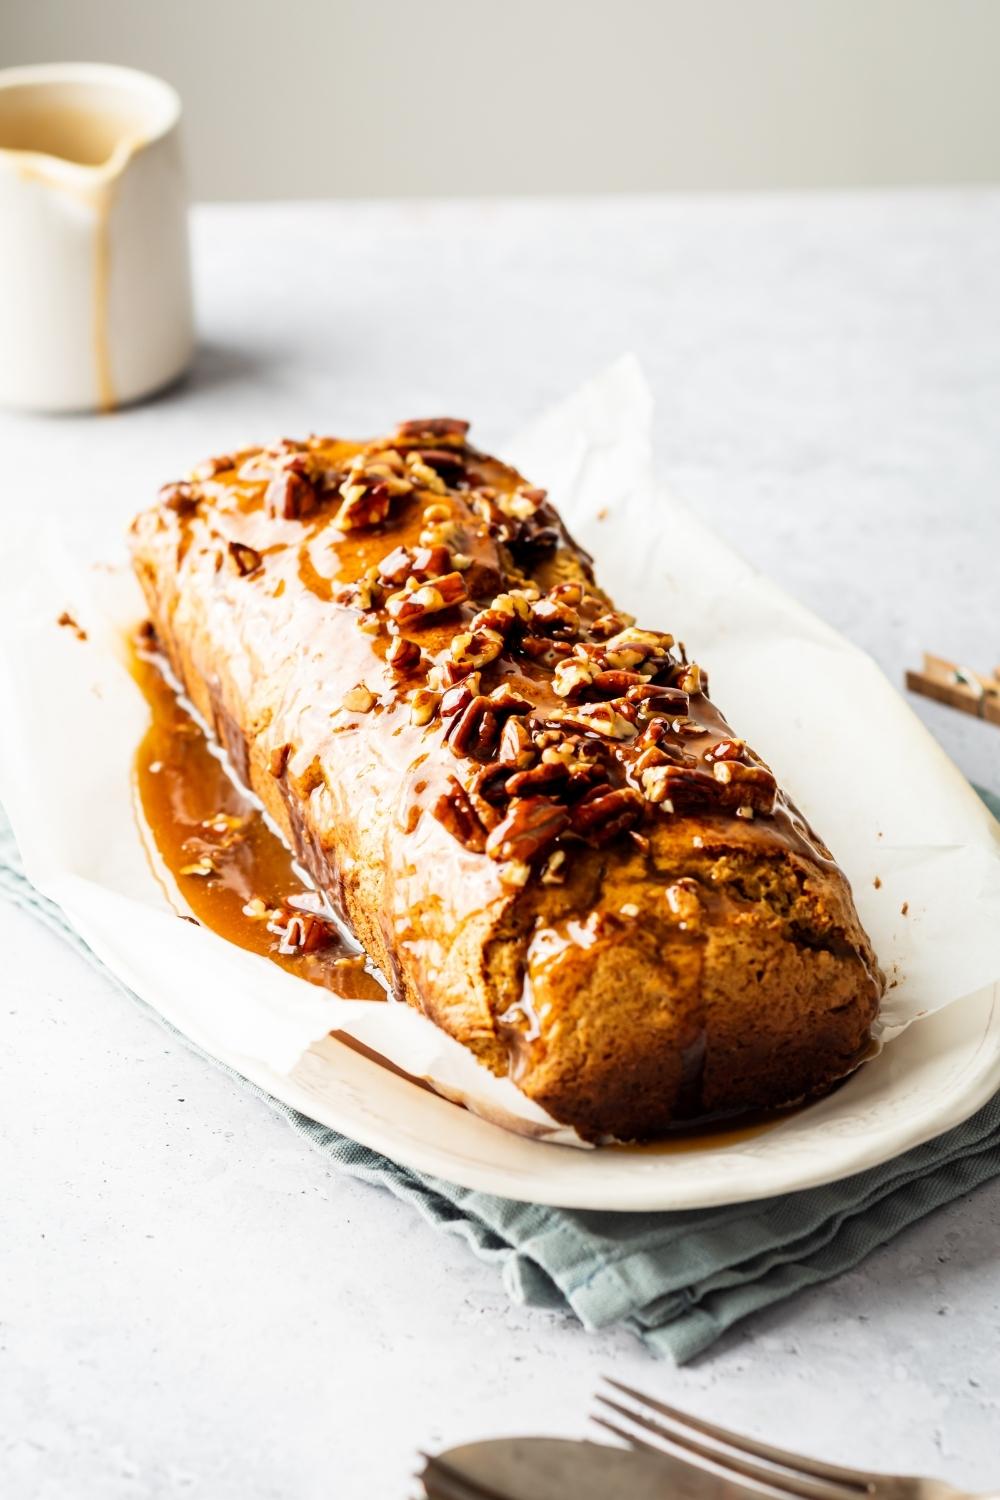 A sweet potato poundcake with pecans and brown sugar glaze on top on a sheet of parchment paper on a white plate.